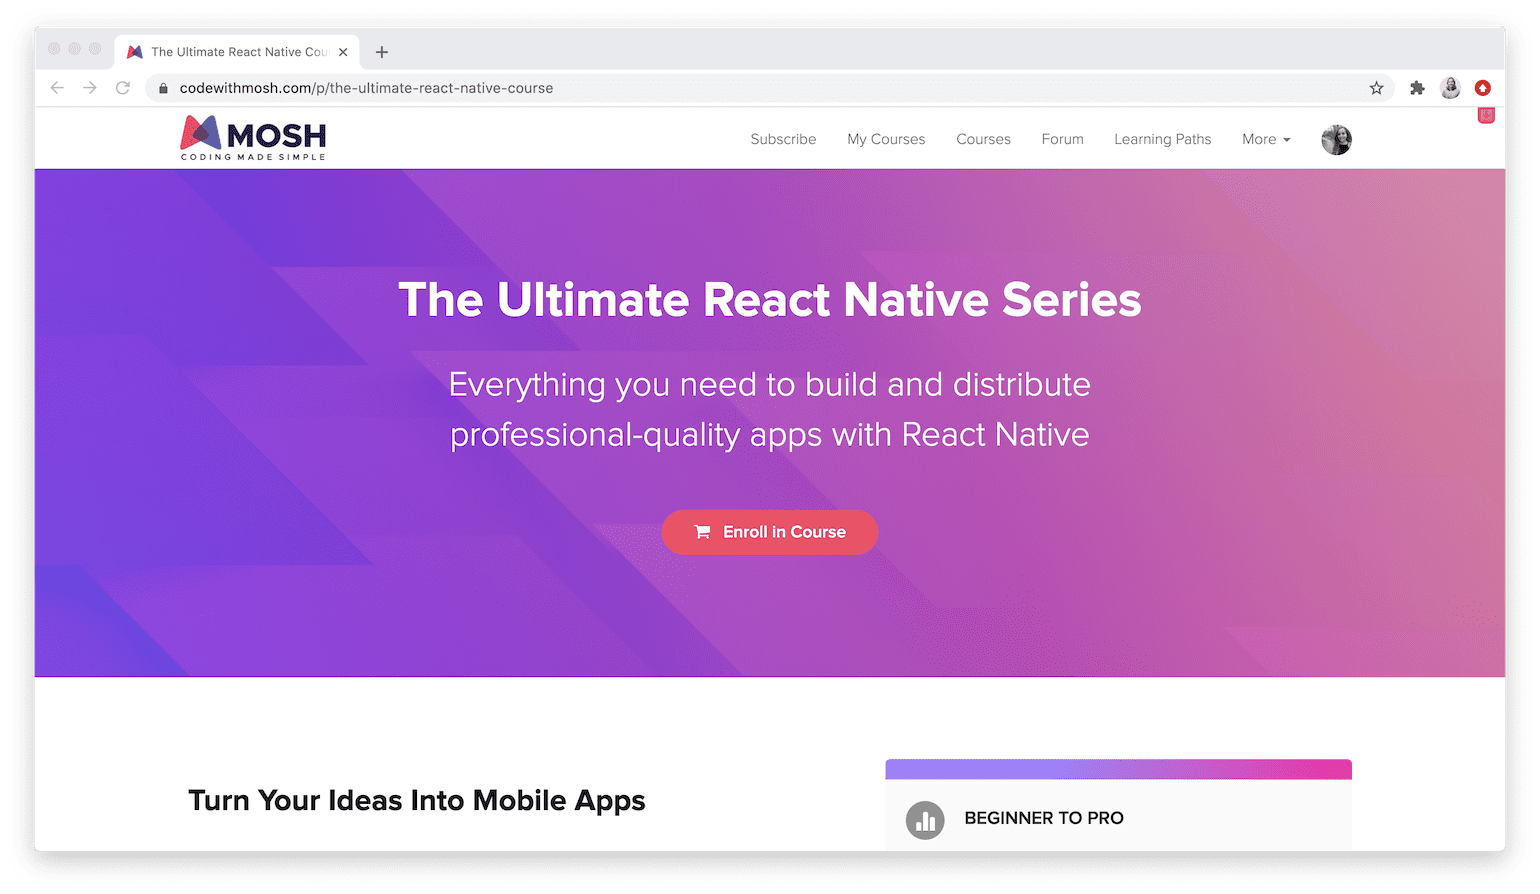 The Ultimate React Native Series